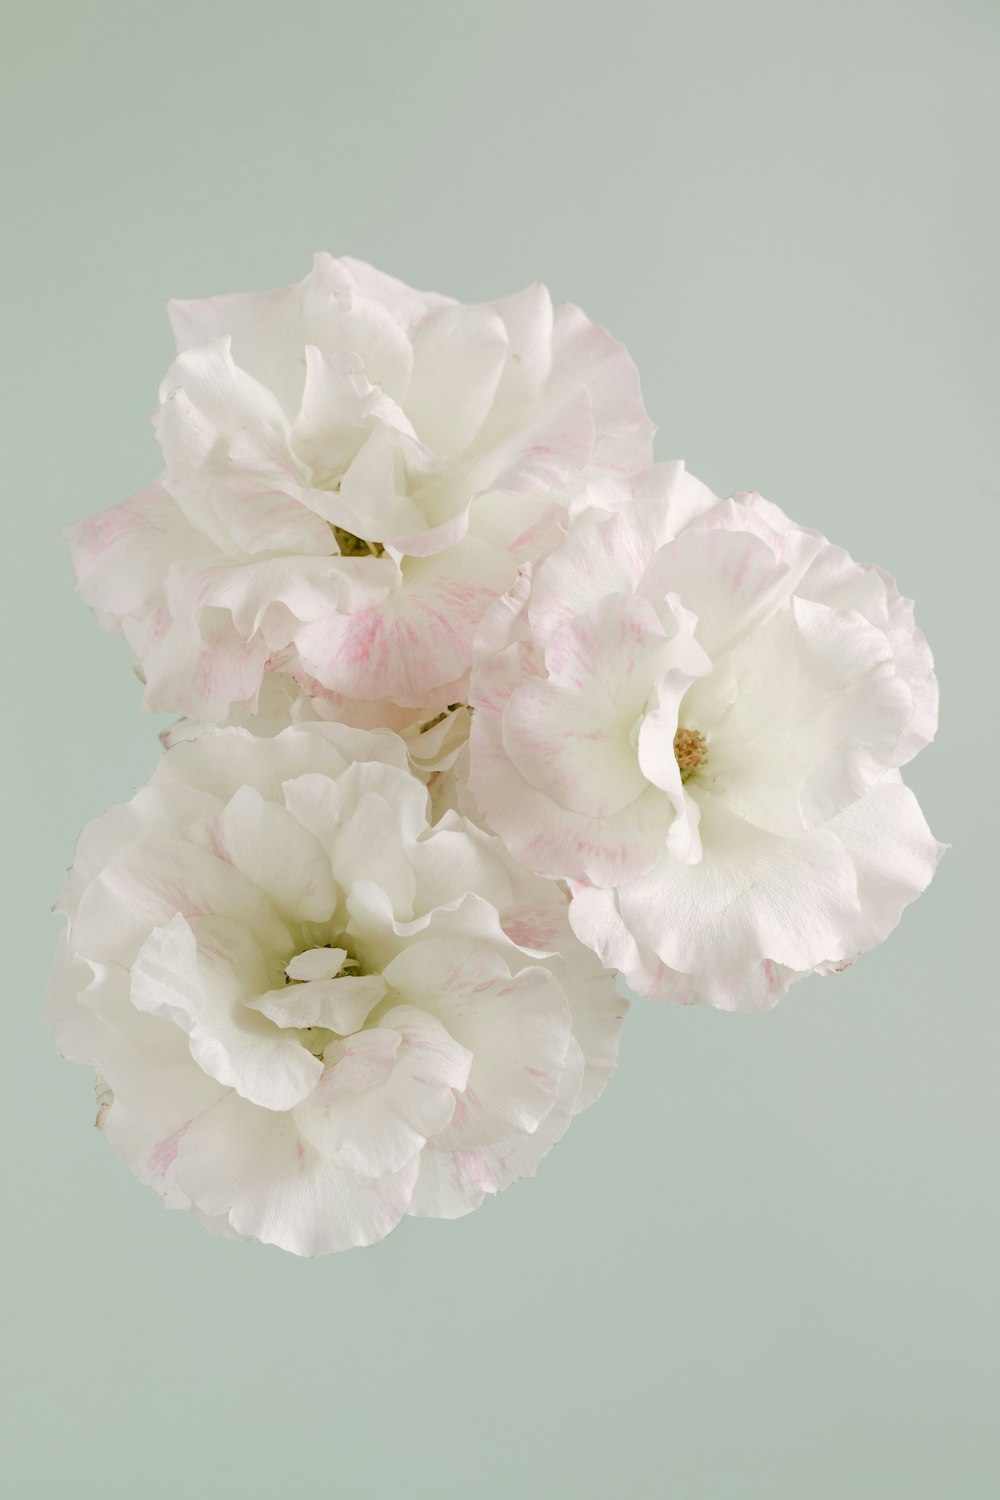 three pink and white flowers are in a vase